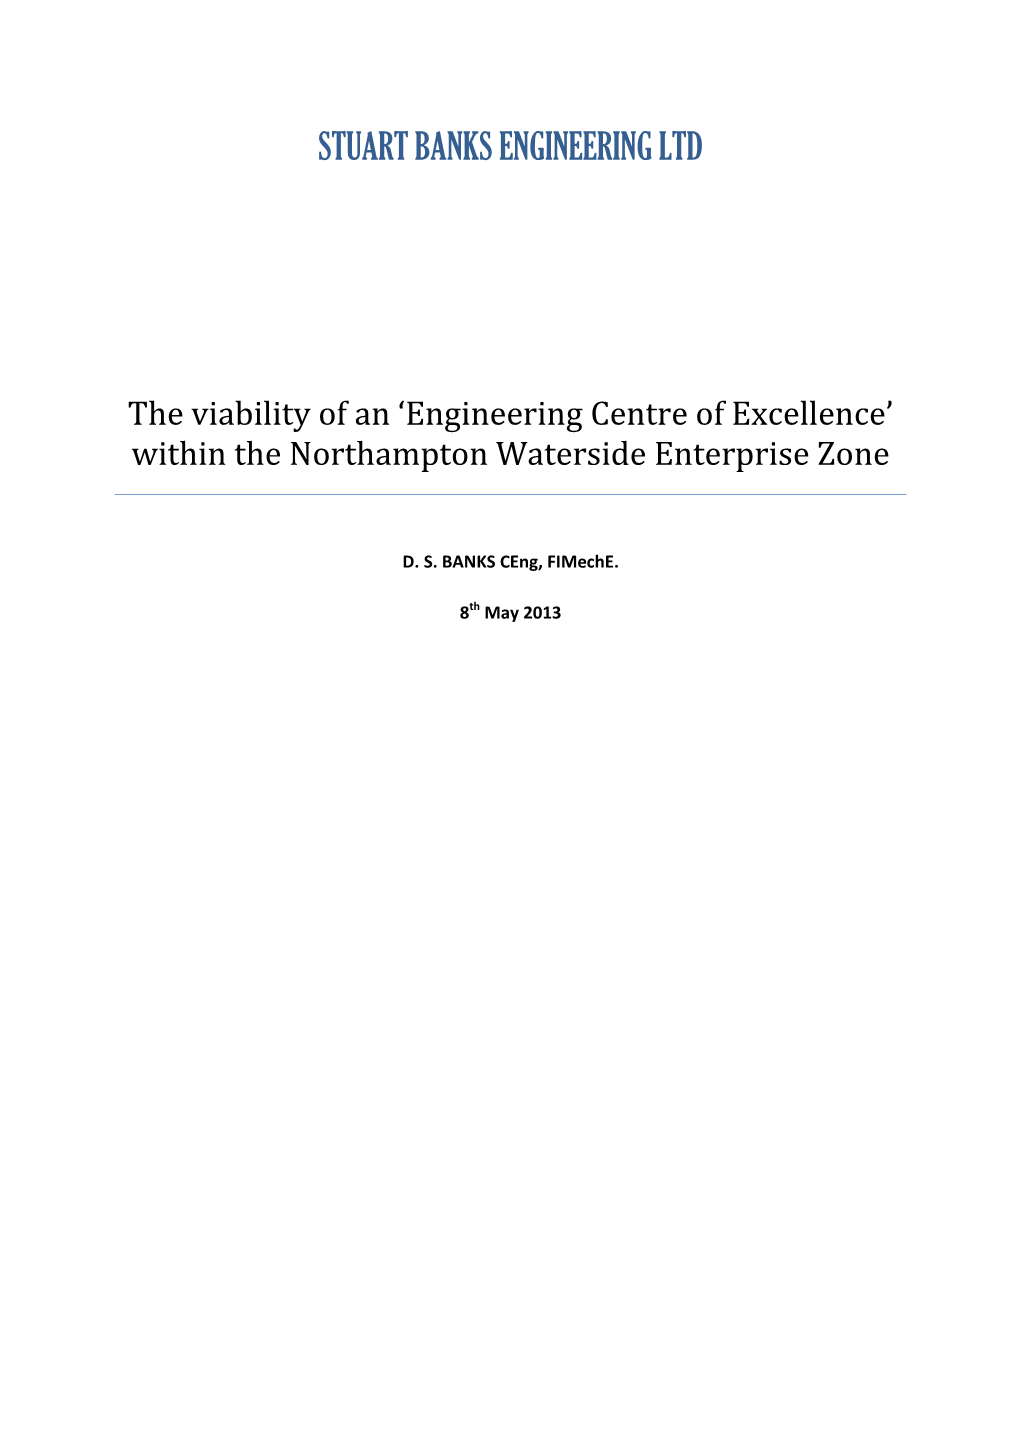 Engineering Centre of Excellence’ Within the Northampton Waterside Enterprise Zone